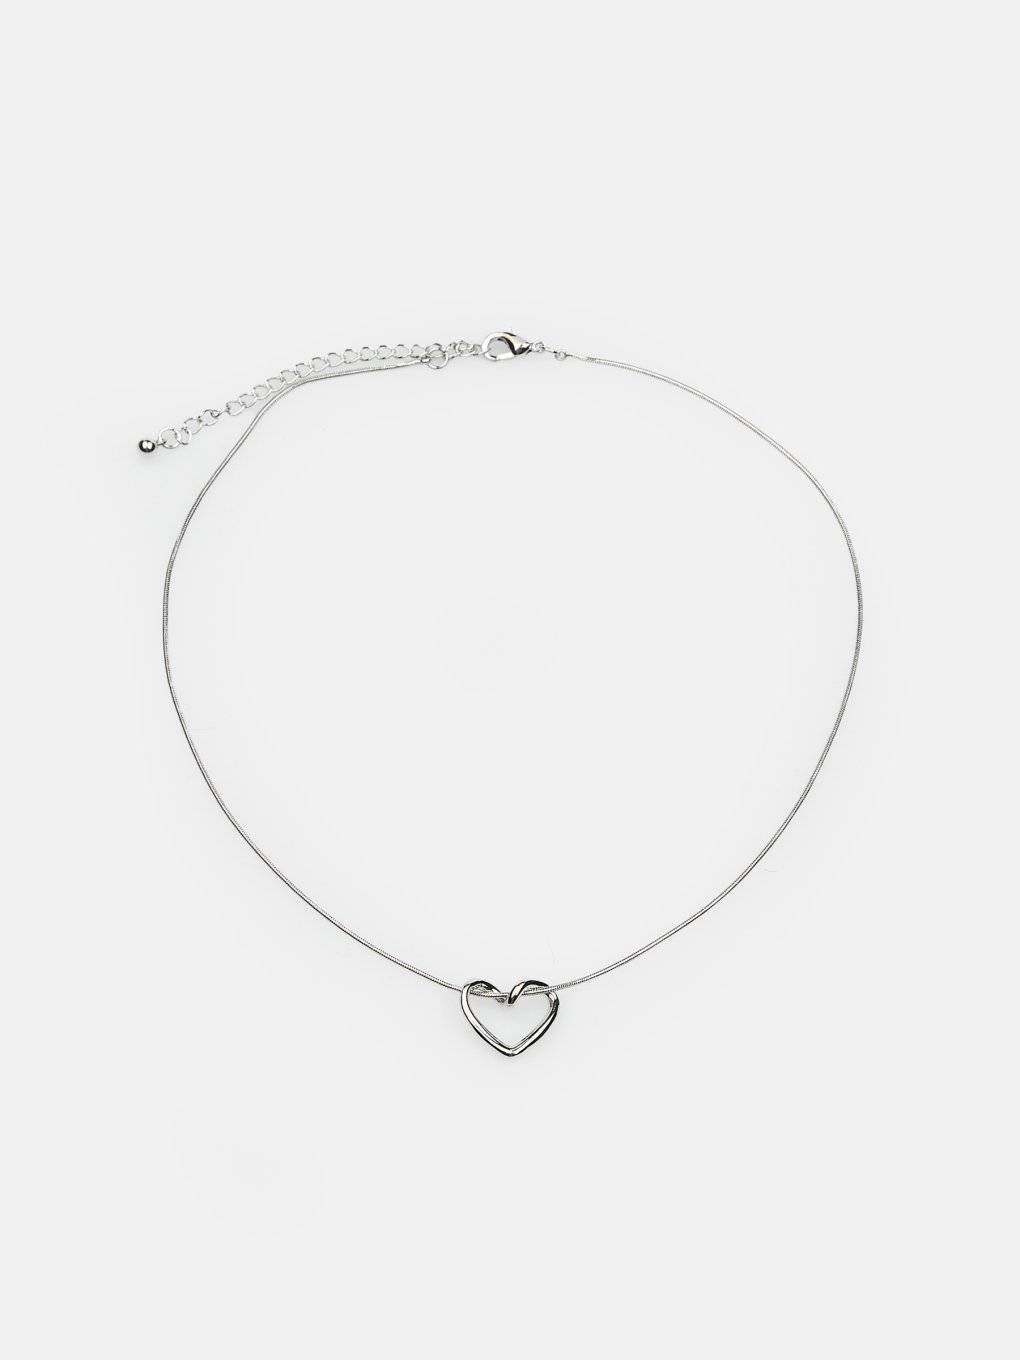 Basic necklace with heart pendant